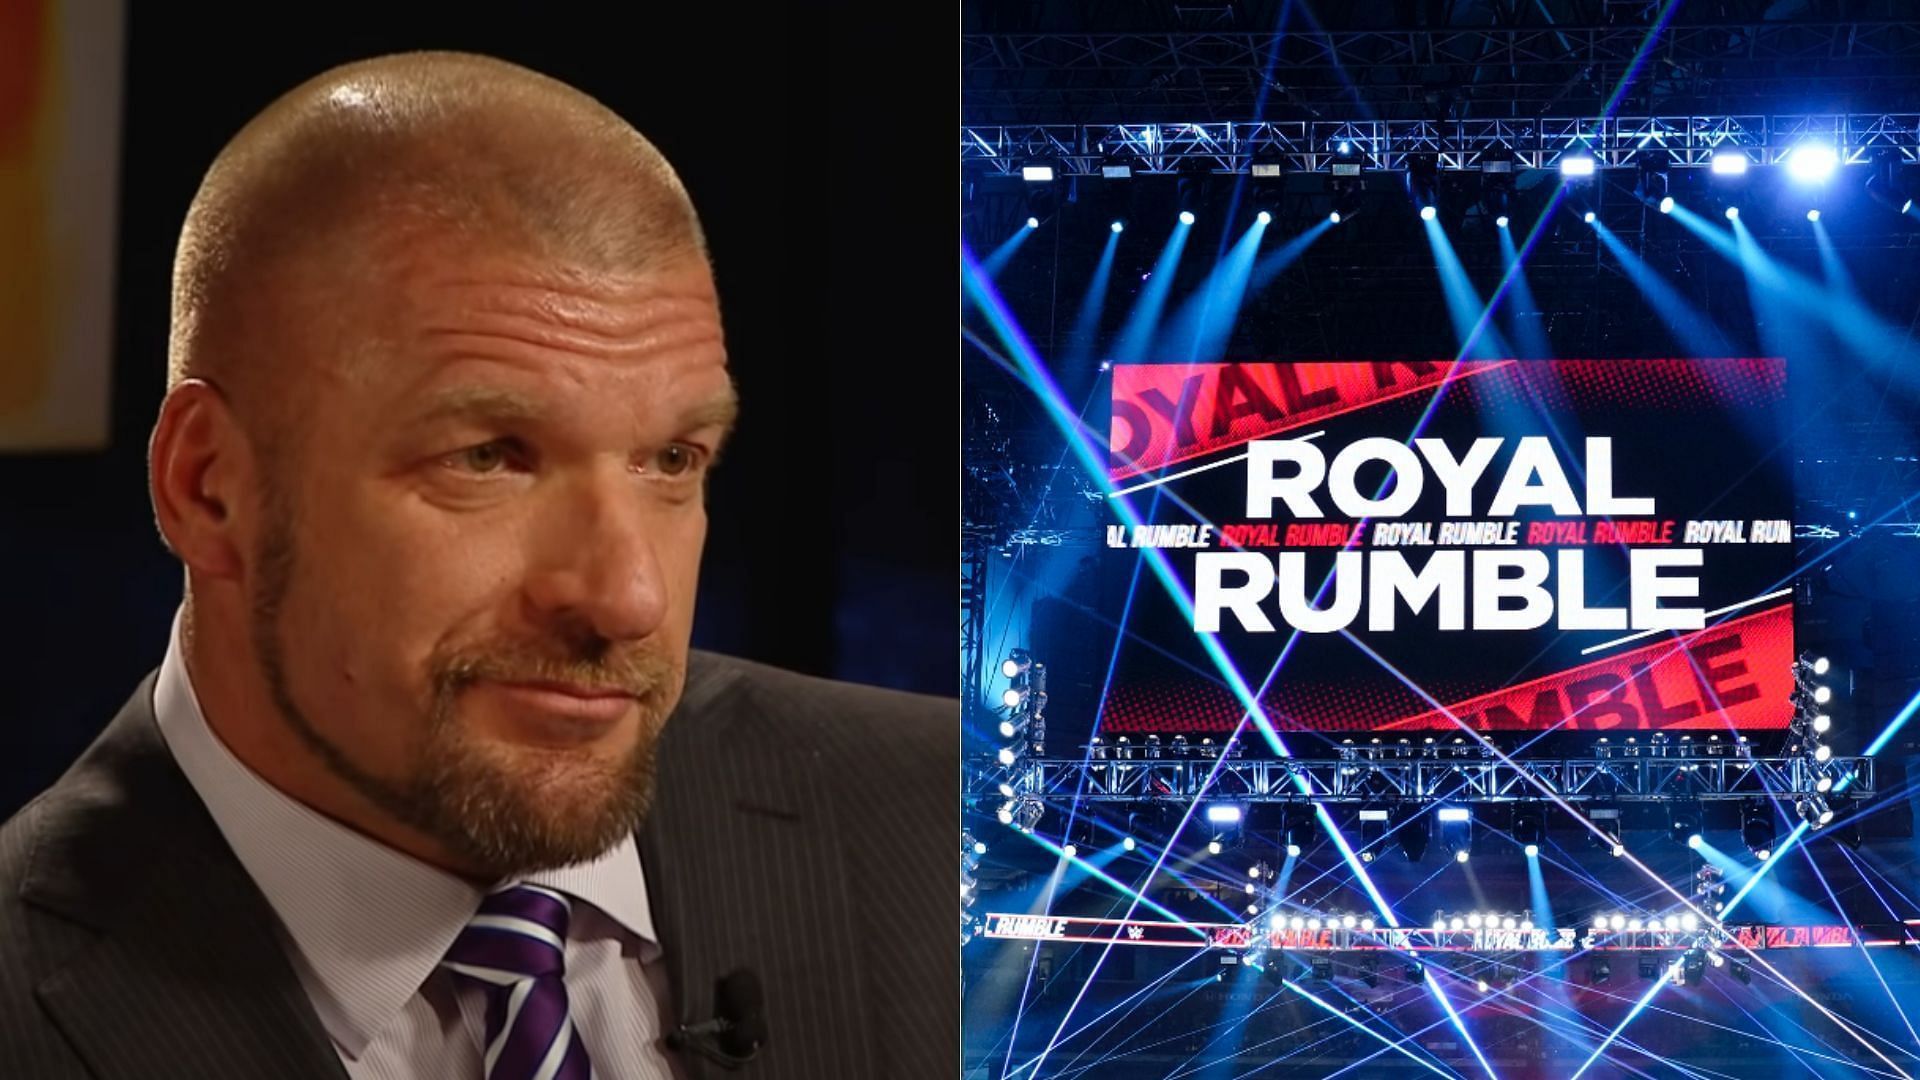 Triple H has signed many stars recently